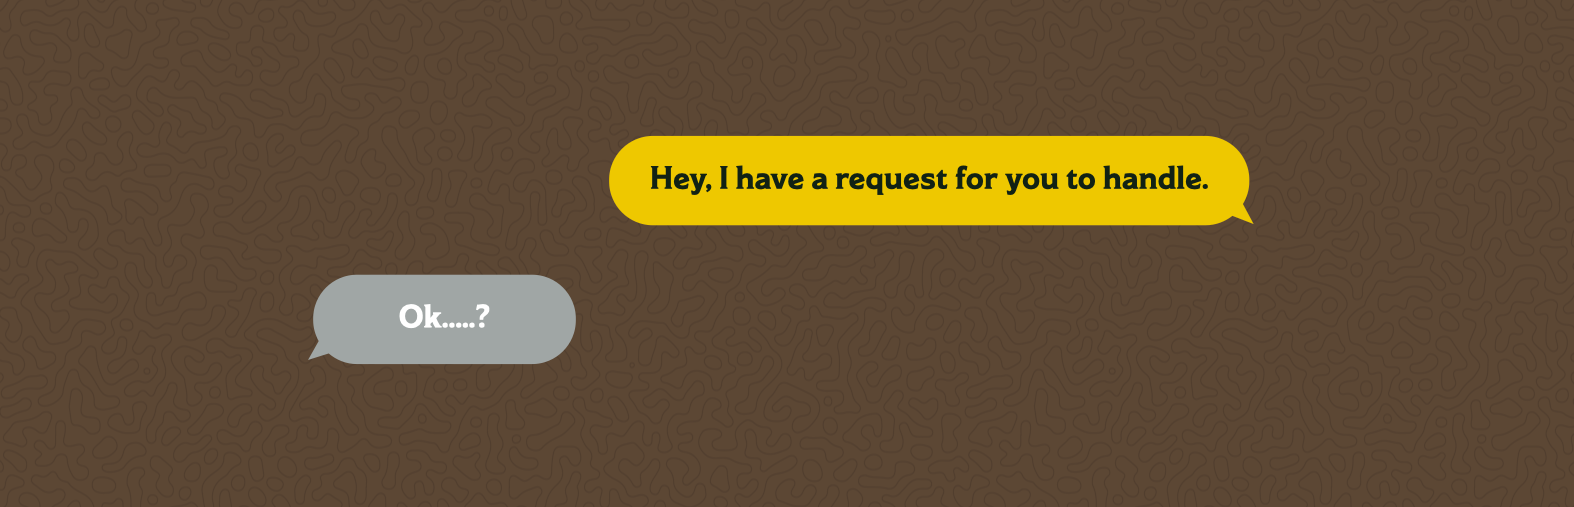 A text message chain between a browser and a server. The browser asks "Hey, I have a request for you to handle." The server responds with "Ok.....?"